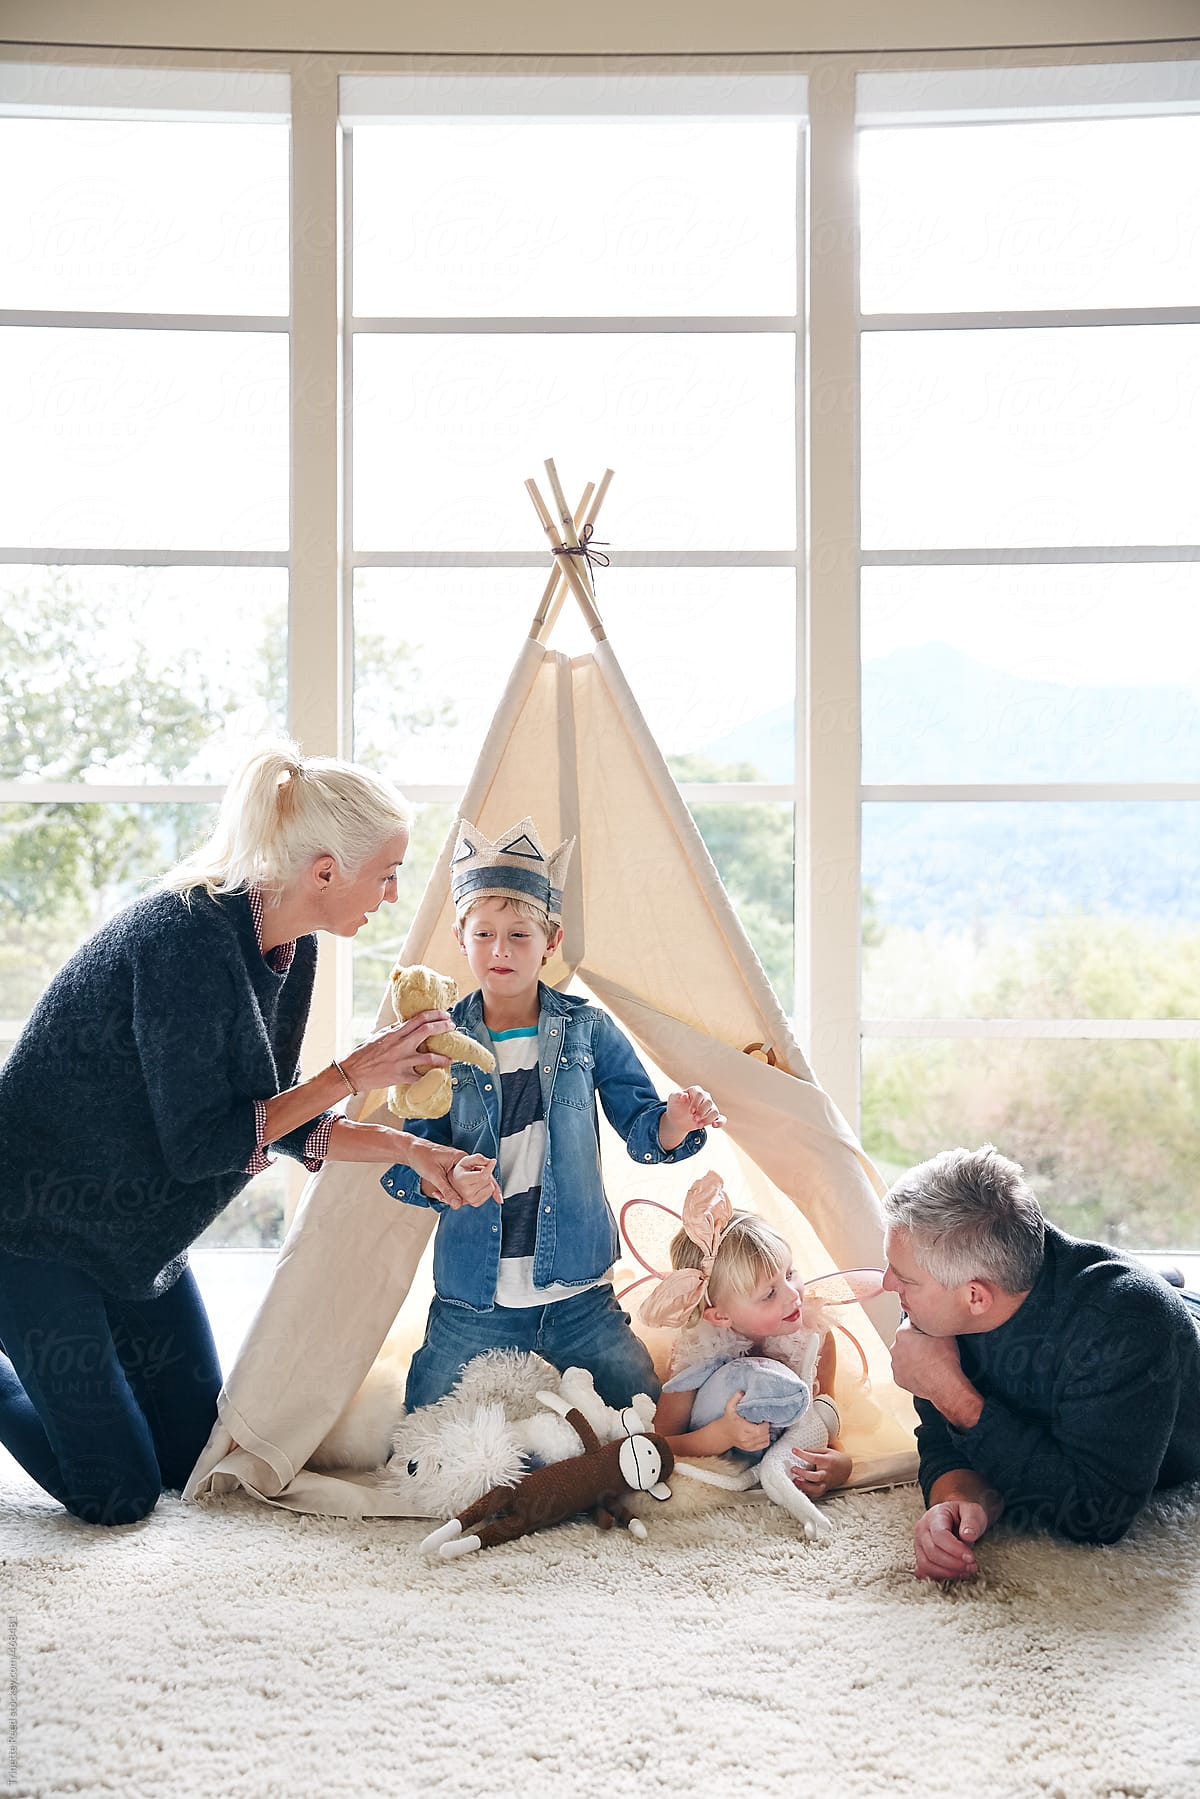 Family playing in teepee tent in living room together.